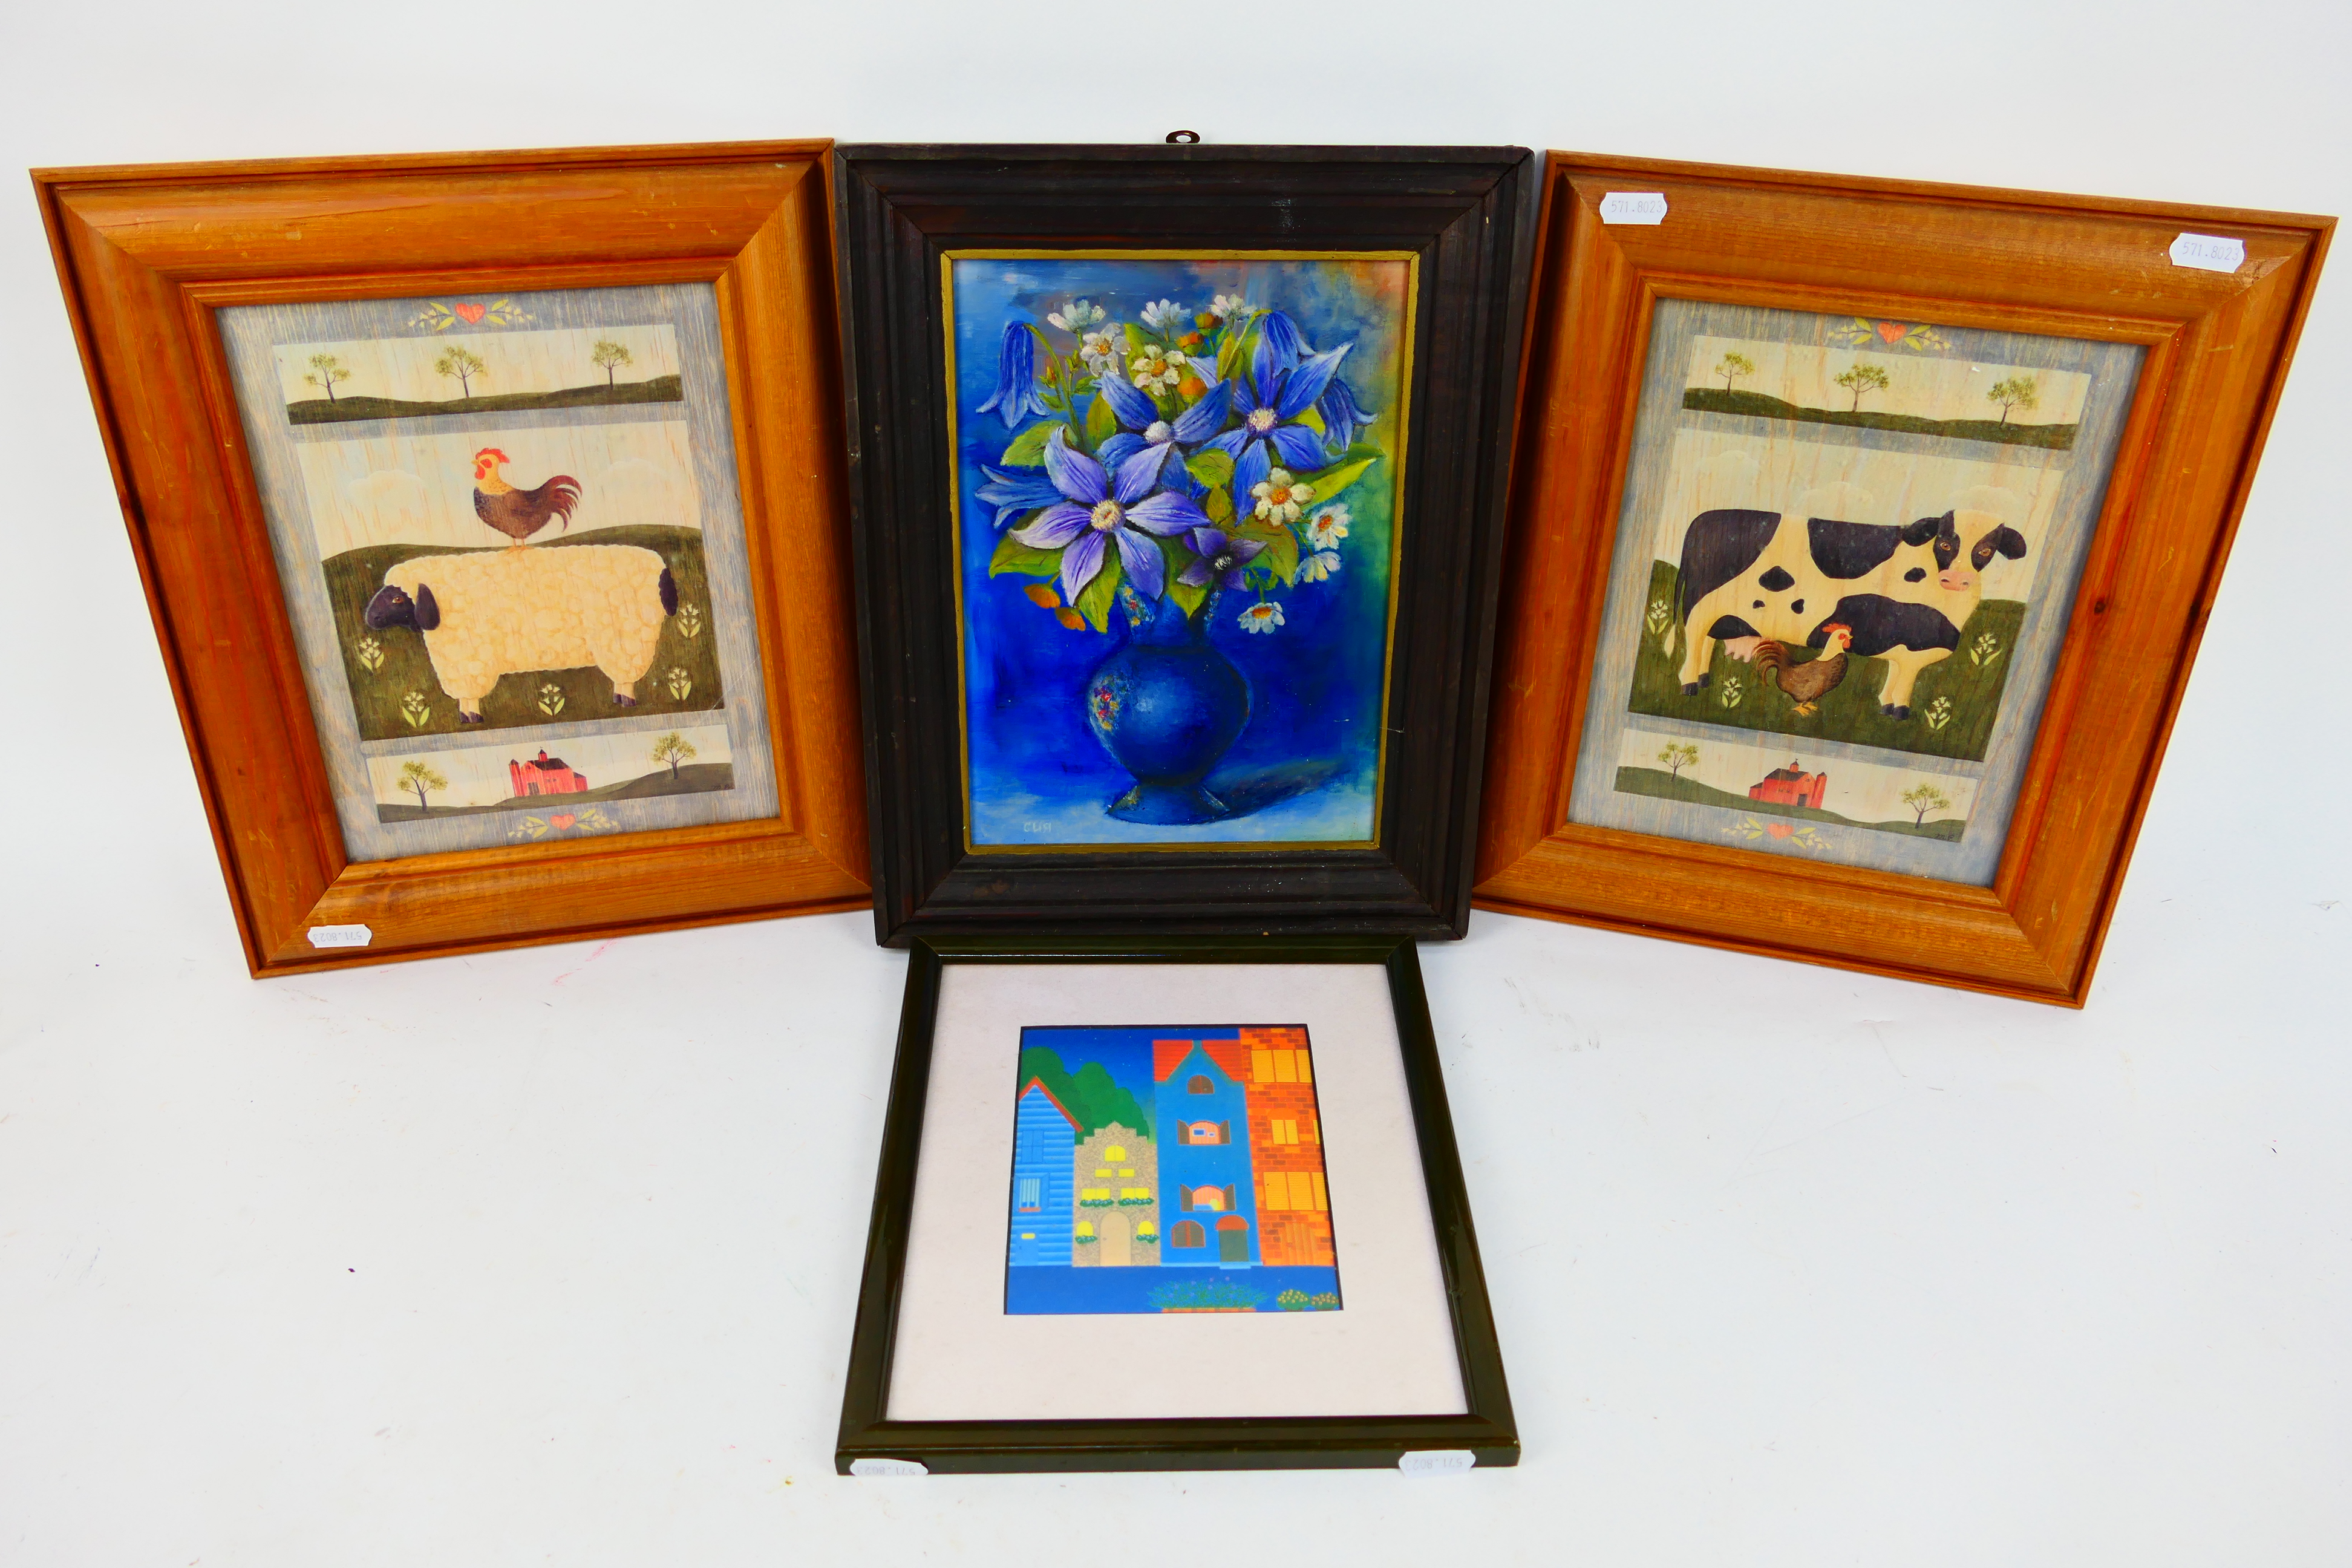 A framed floral still life on board, 26 cm x 19 cm image size and three framed prints.